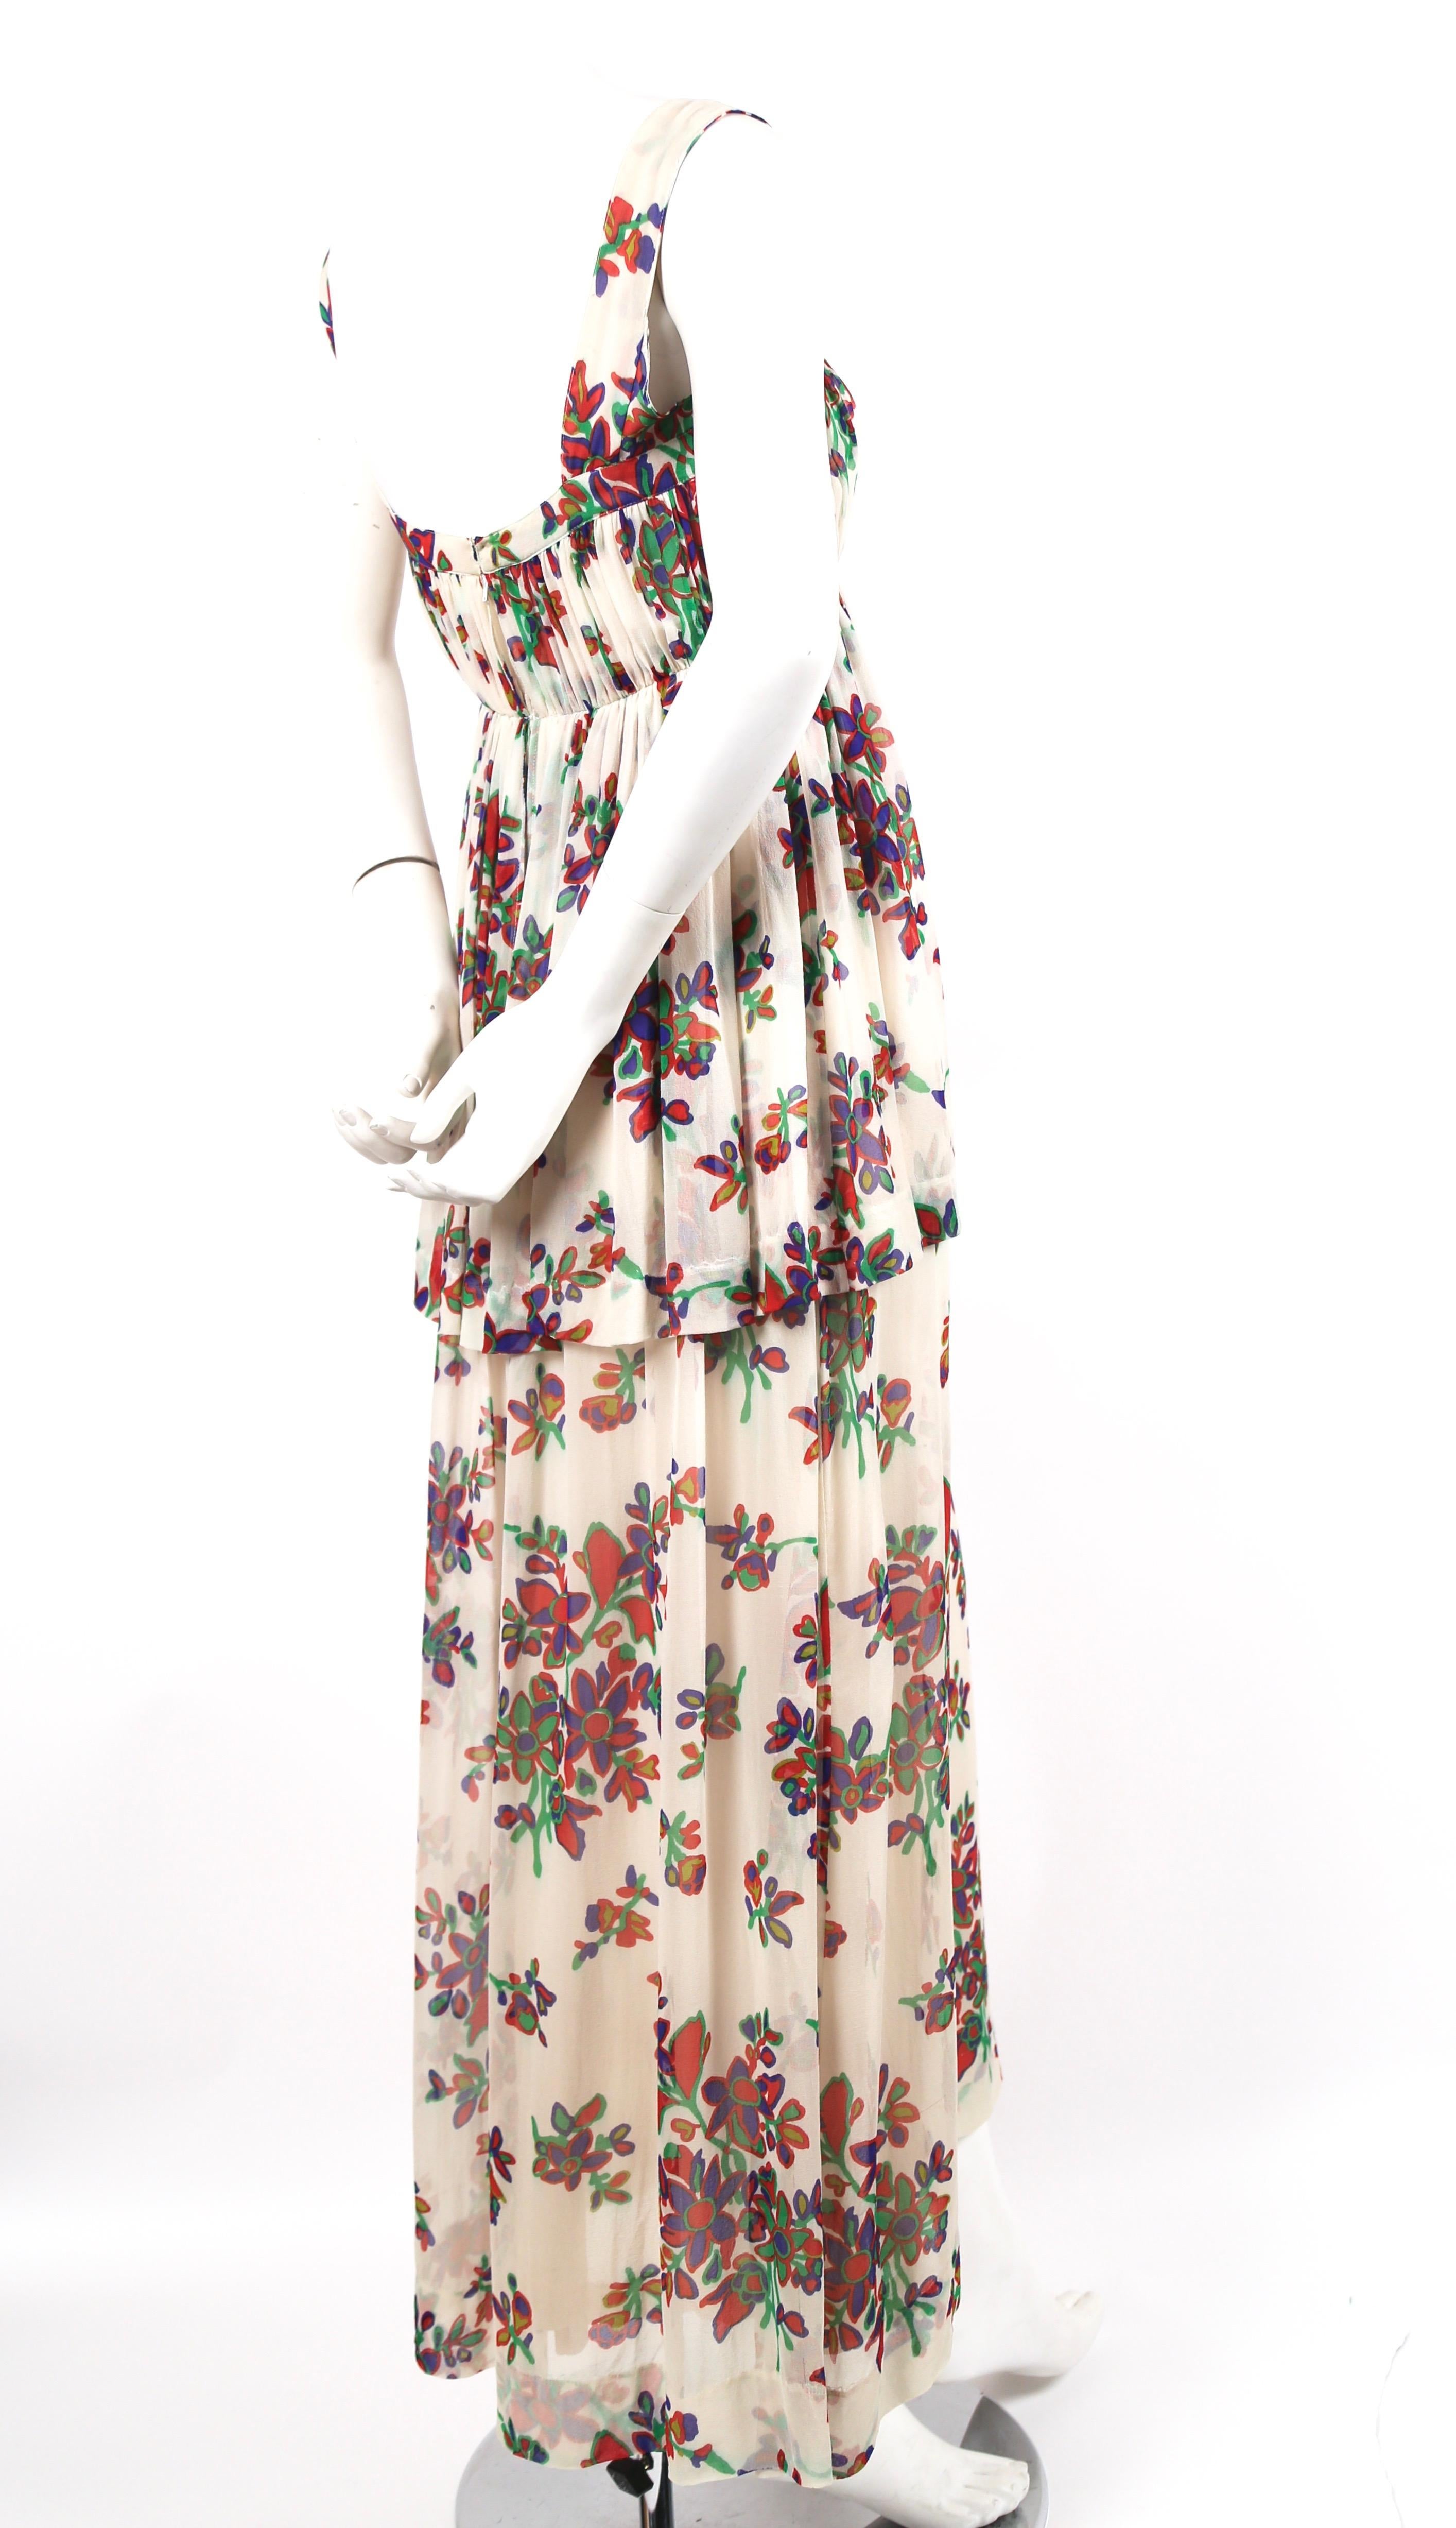 Delicate, floral printed, silk chiffon summer dress designed by Yves Saint Laurent dating to the 1970s. Best fits a size 4 or 6. Approximate measurements: bust 32-33